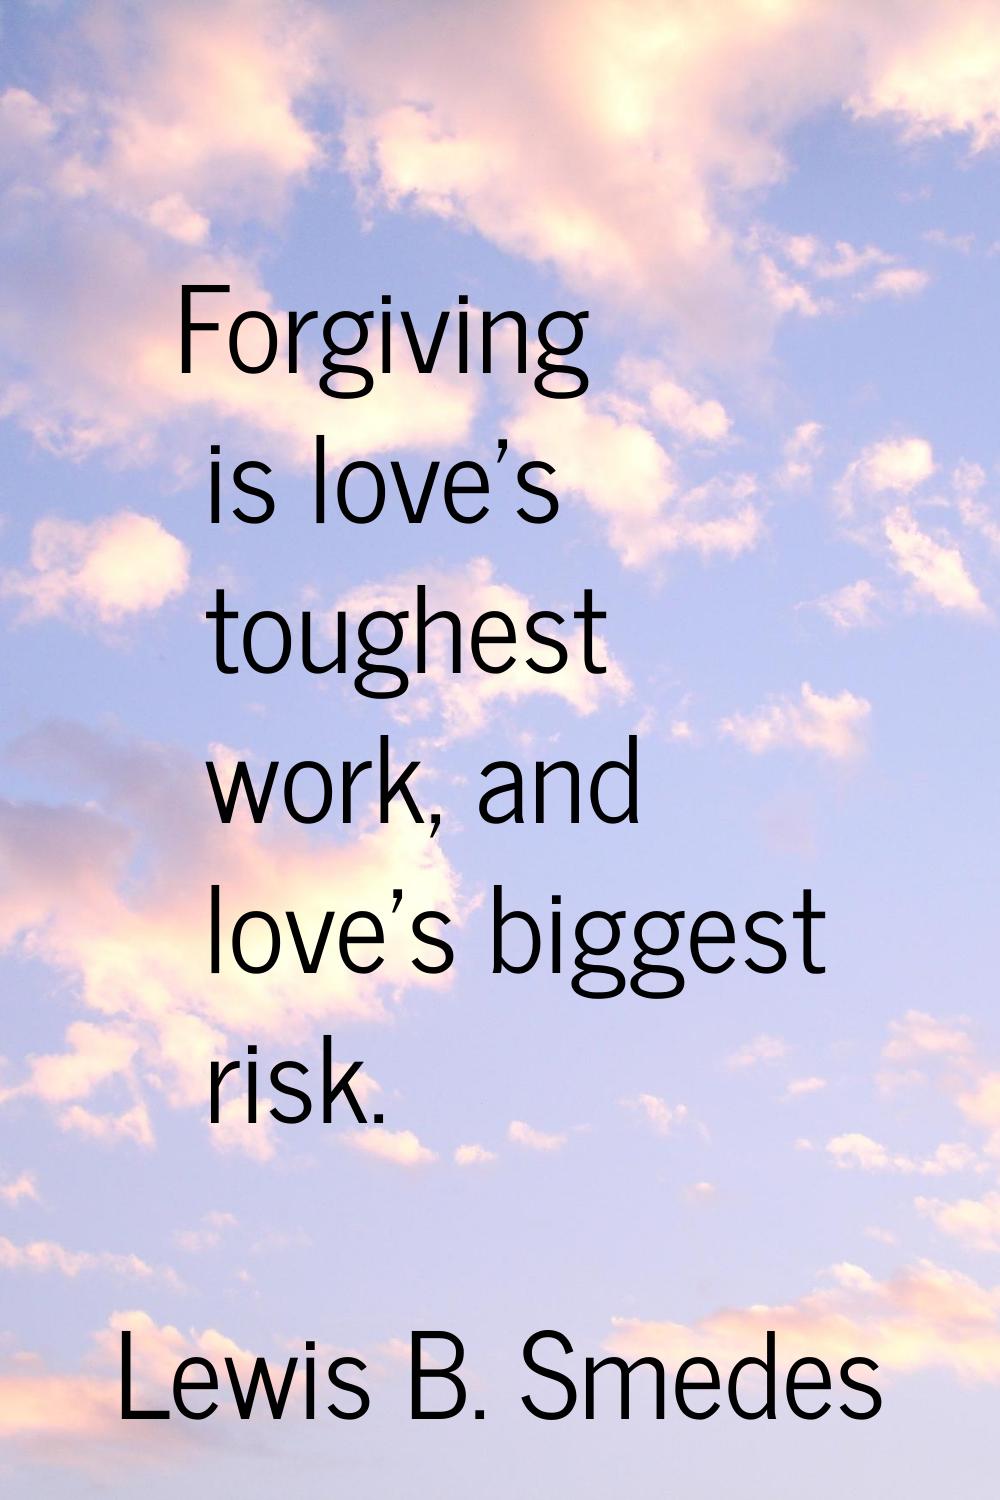 Forgiving is love's toughest work, and love's biggest risk.